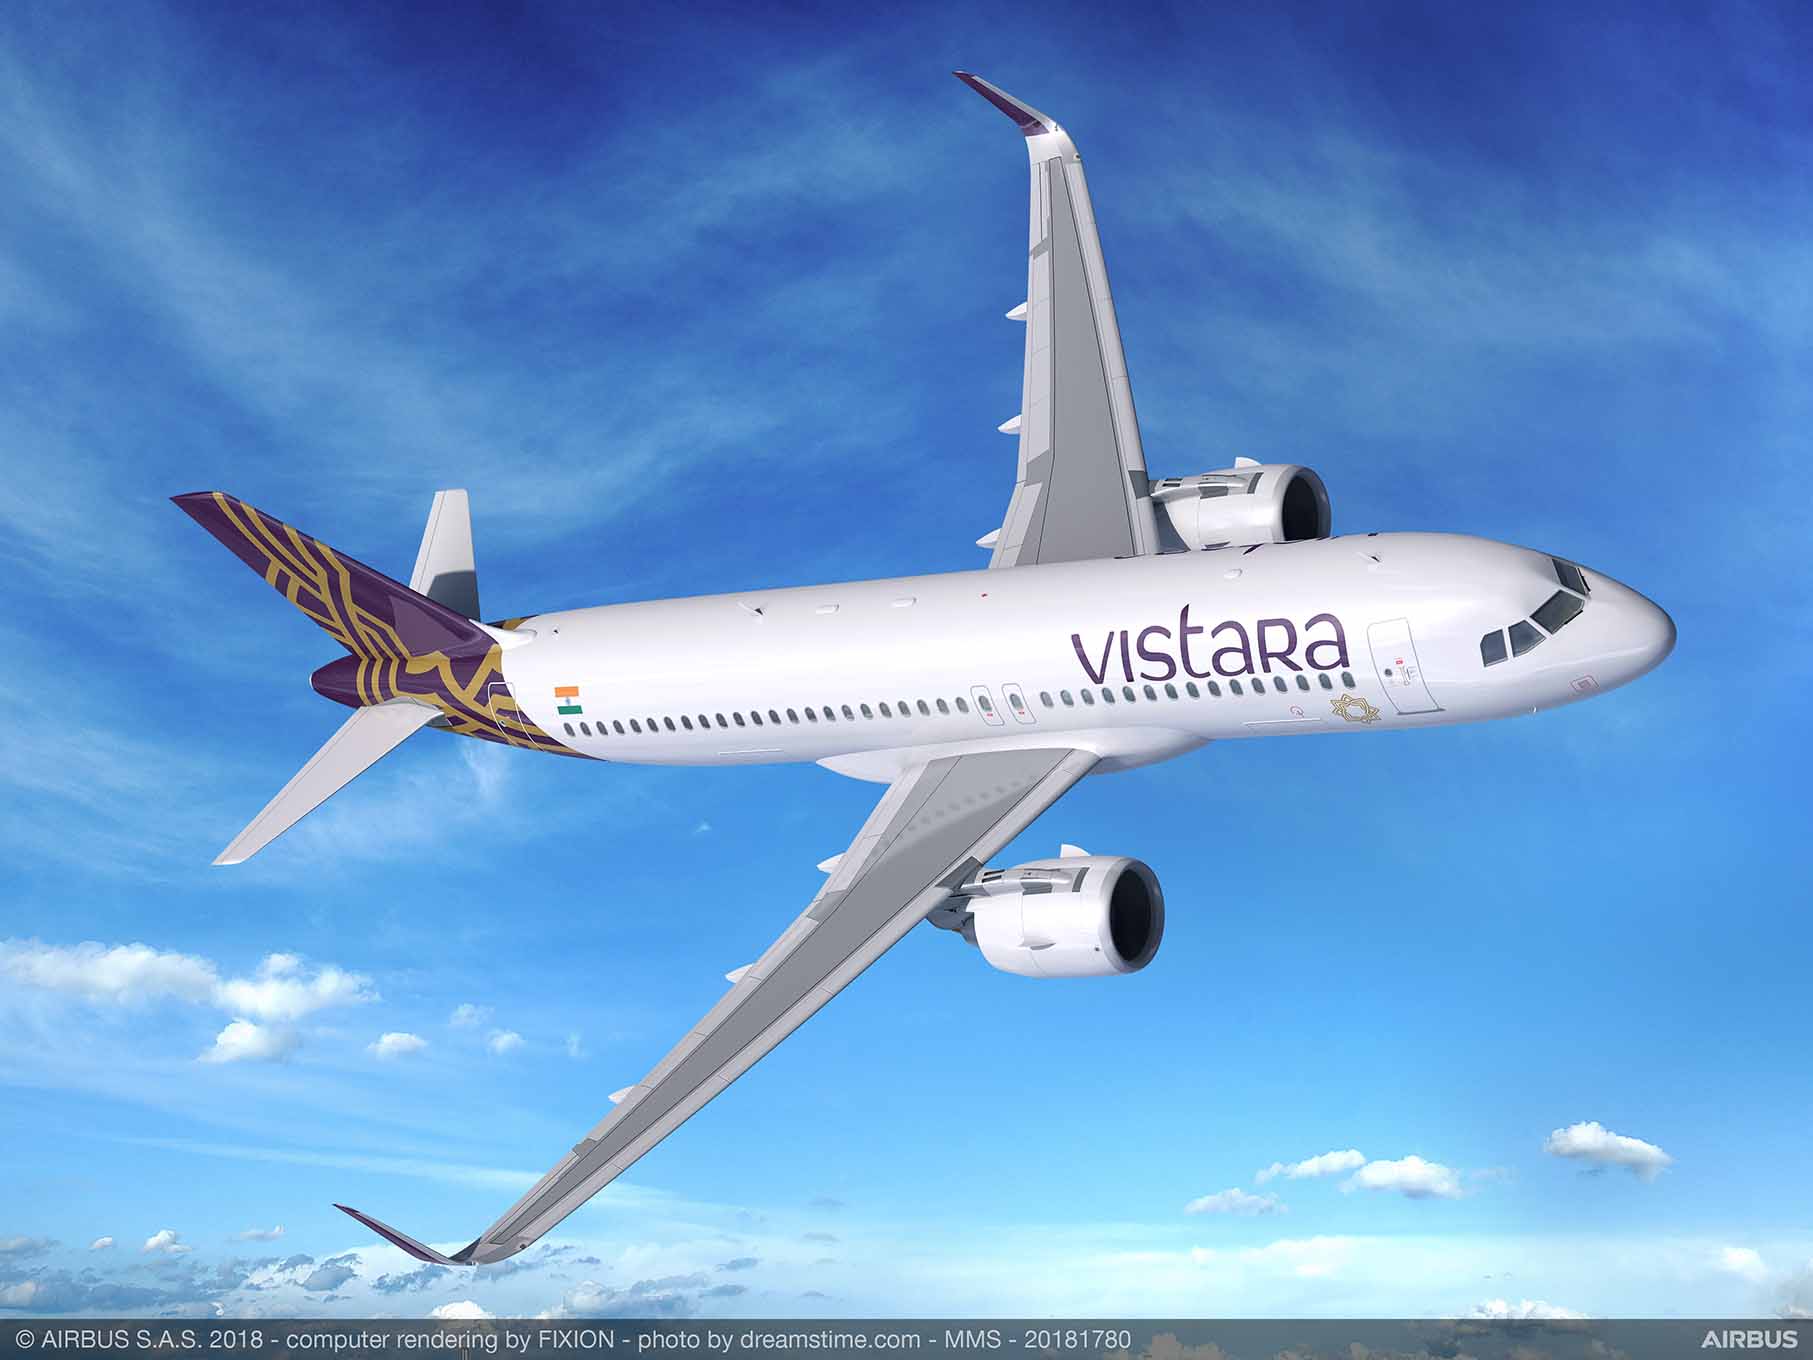 Vistara introduces new services as airline’s 2020 expansion plans take shape